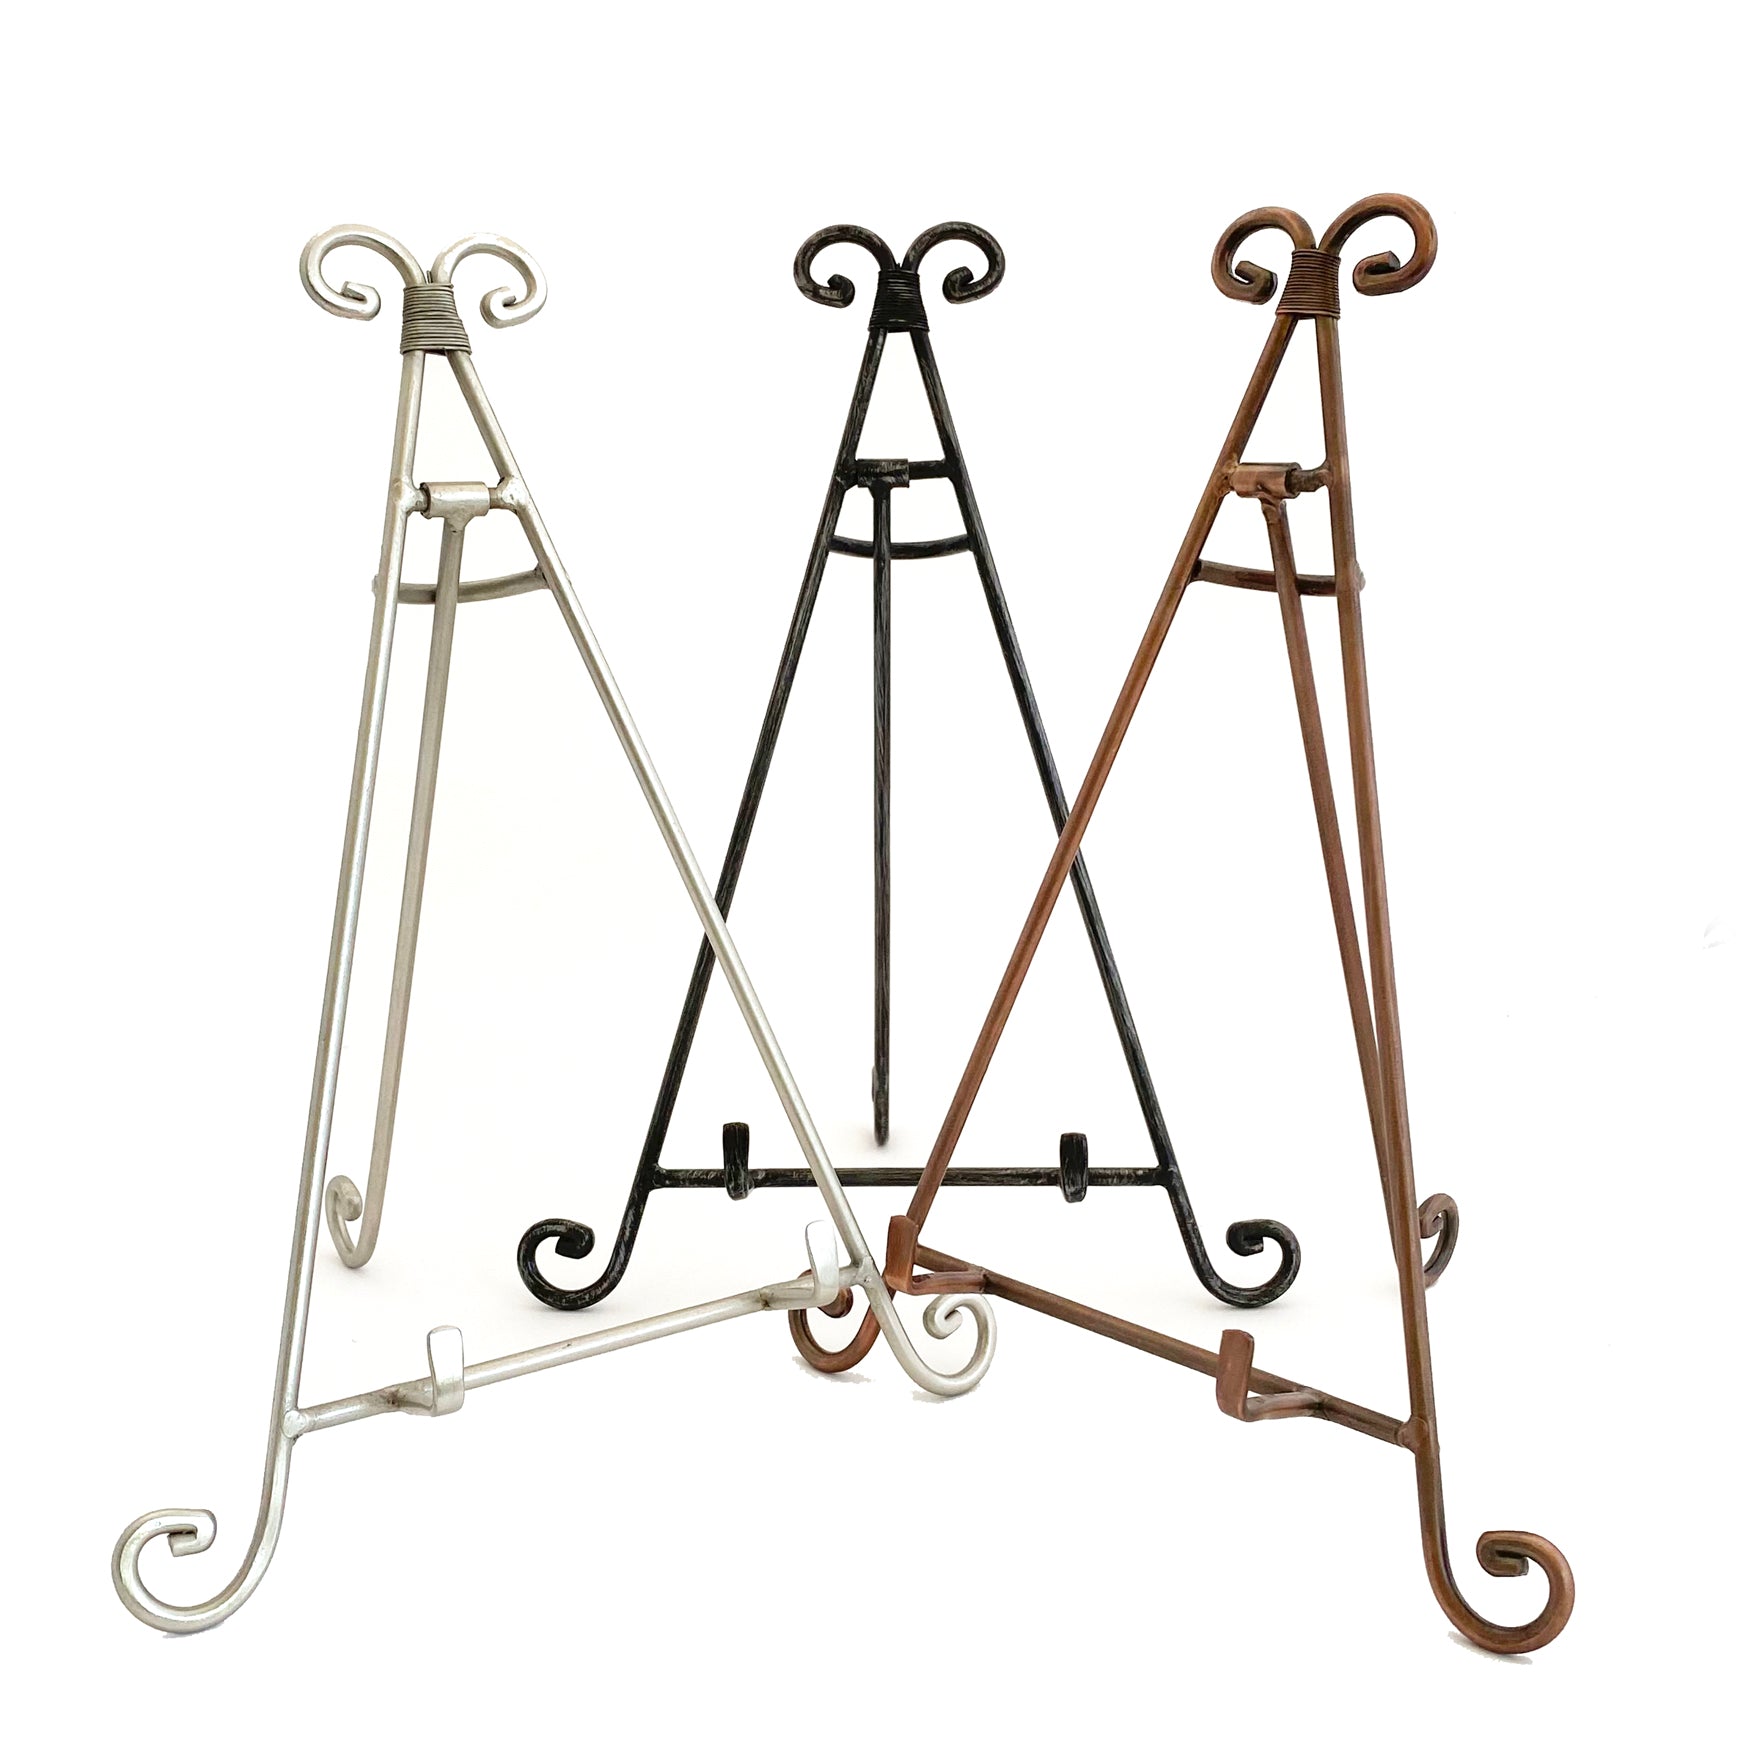 Zeckos Wrought Iron Display Picture Easel Decorative Holder 50 inch